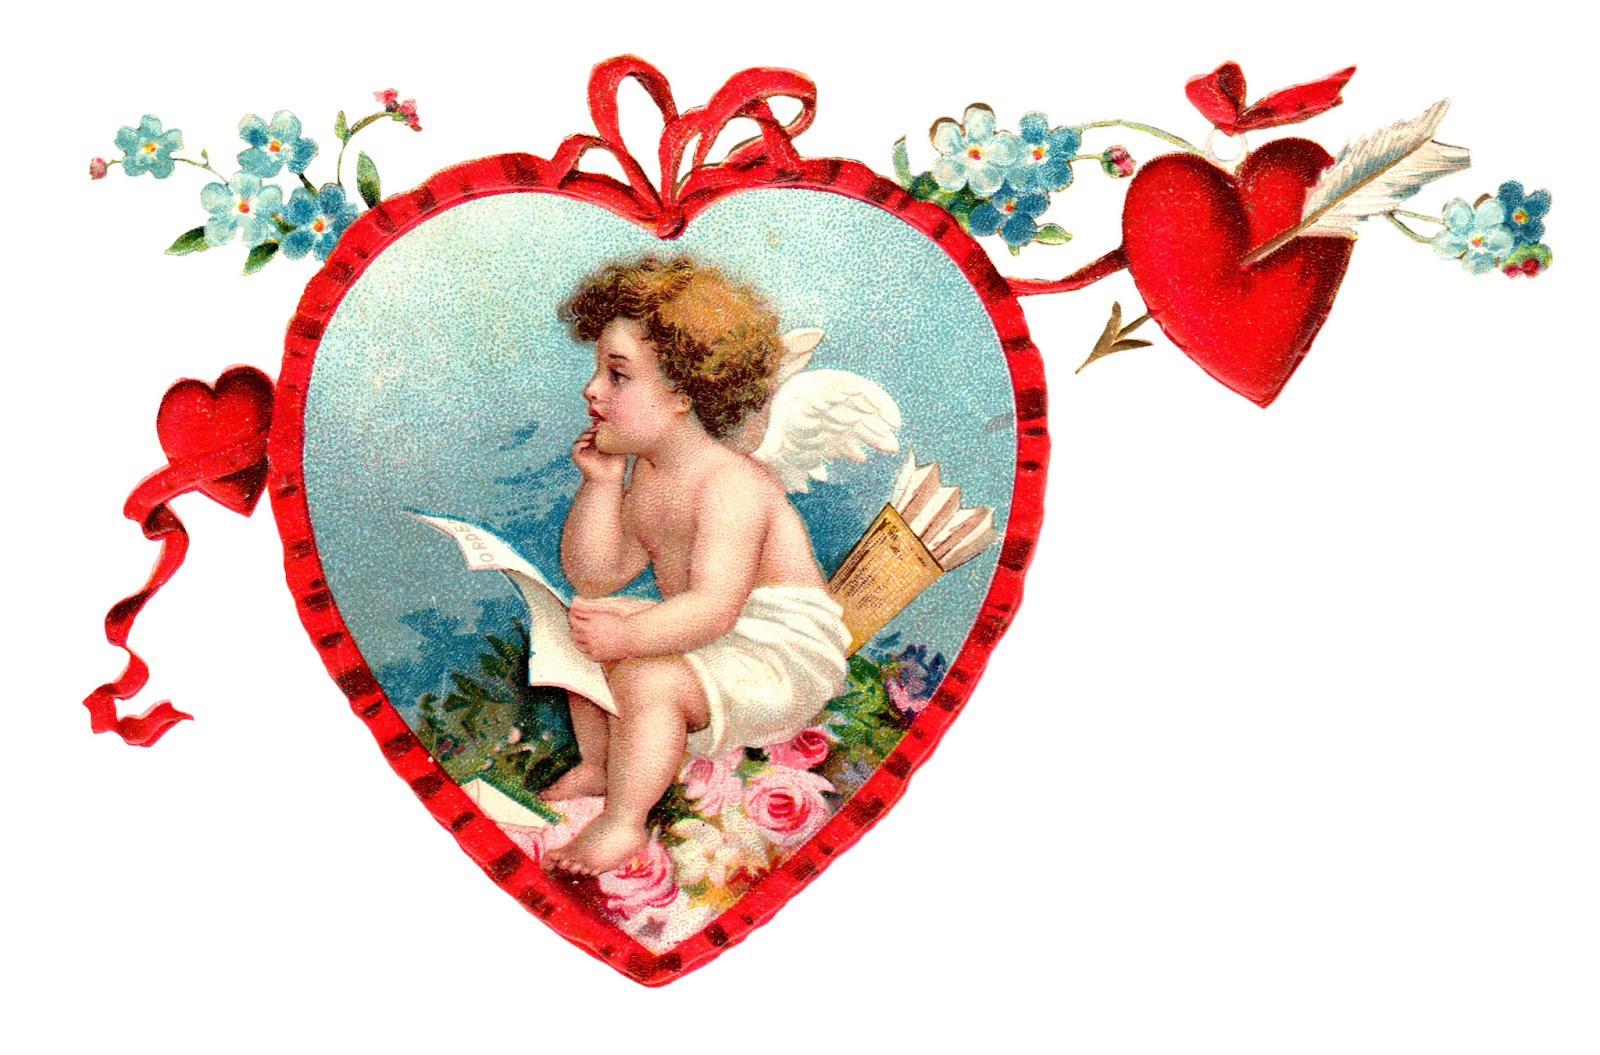 Victorian Cherub Printable Vintage Valentine\u2019s Day Cupid Card Digital Clipart Commercial Use Graphic Clip Art Instant Download File Vin0005